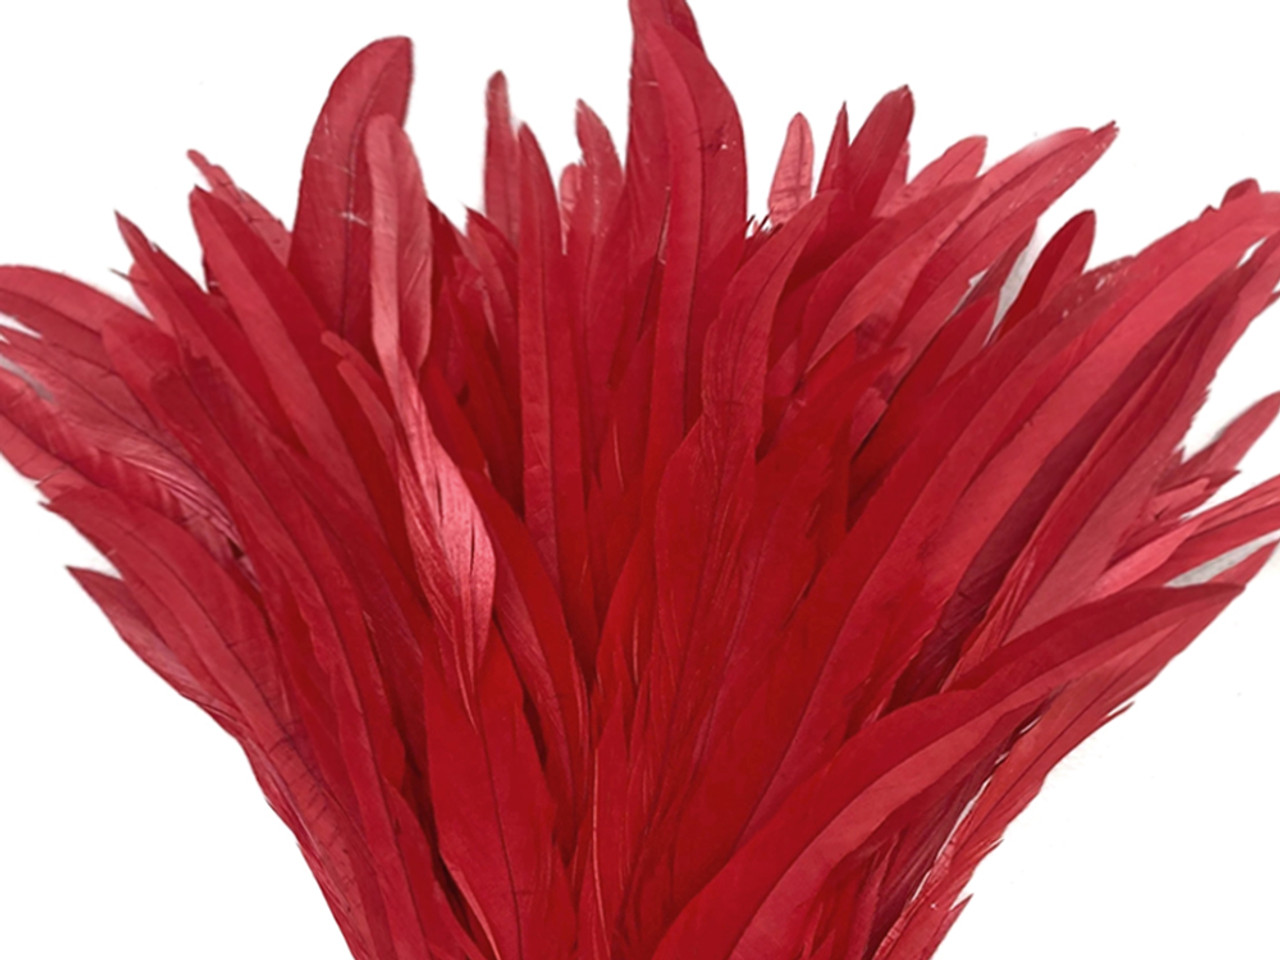 14-16 Ostrich Feathers: Red (6) [] 